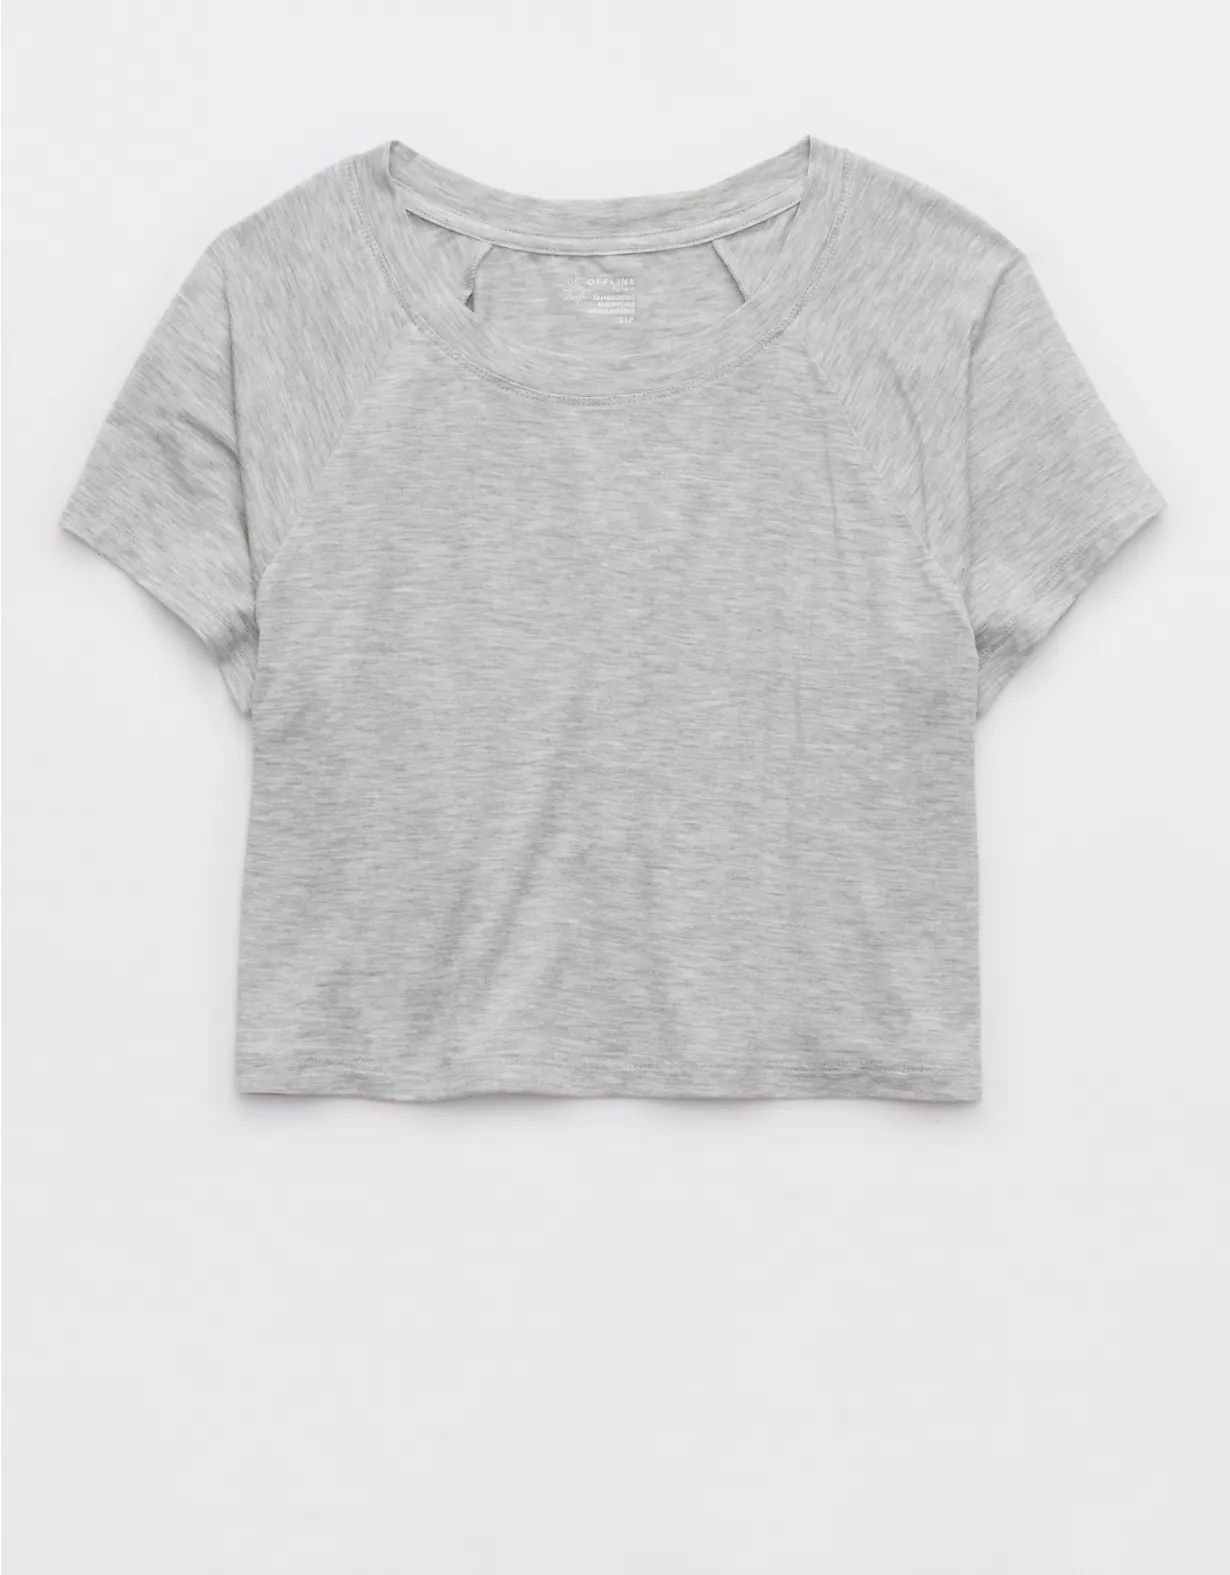 OFFLINE By Aerie Thumbs Up Cropped T-Shirt | Aerie